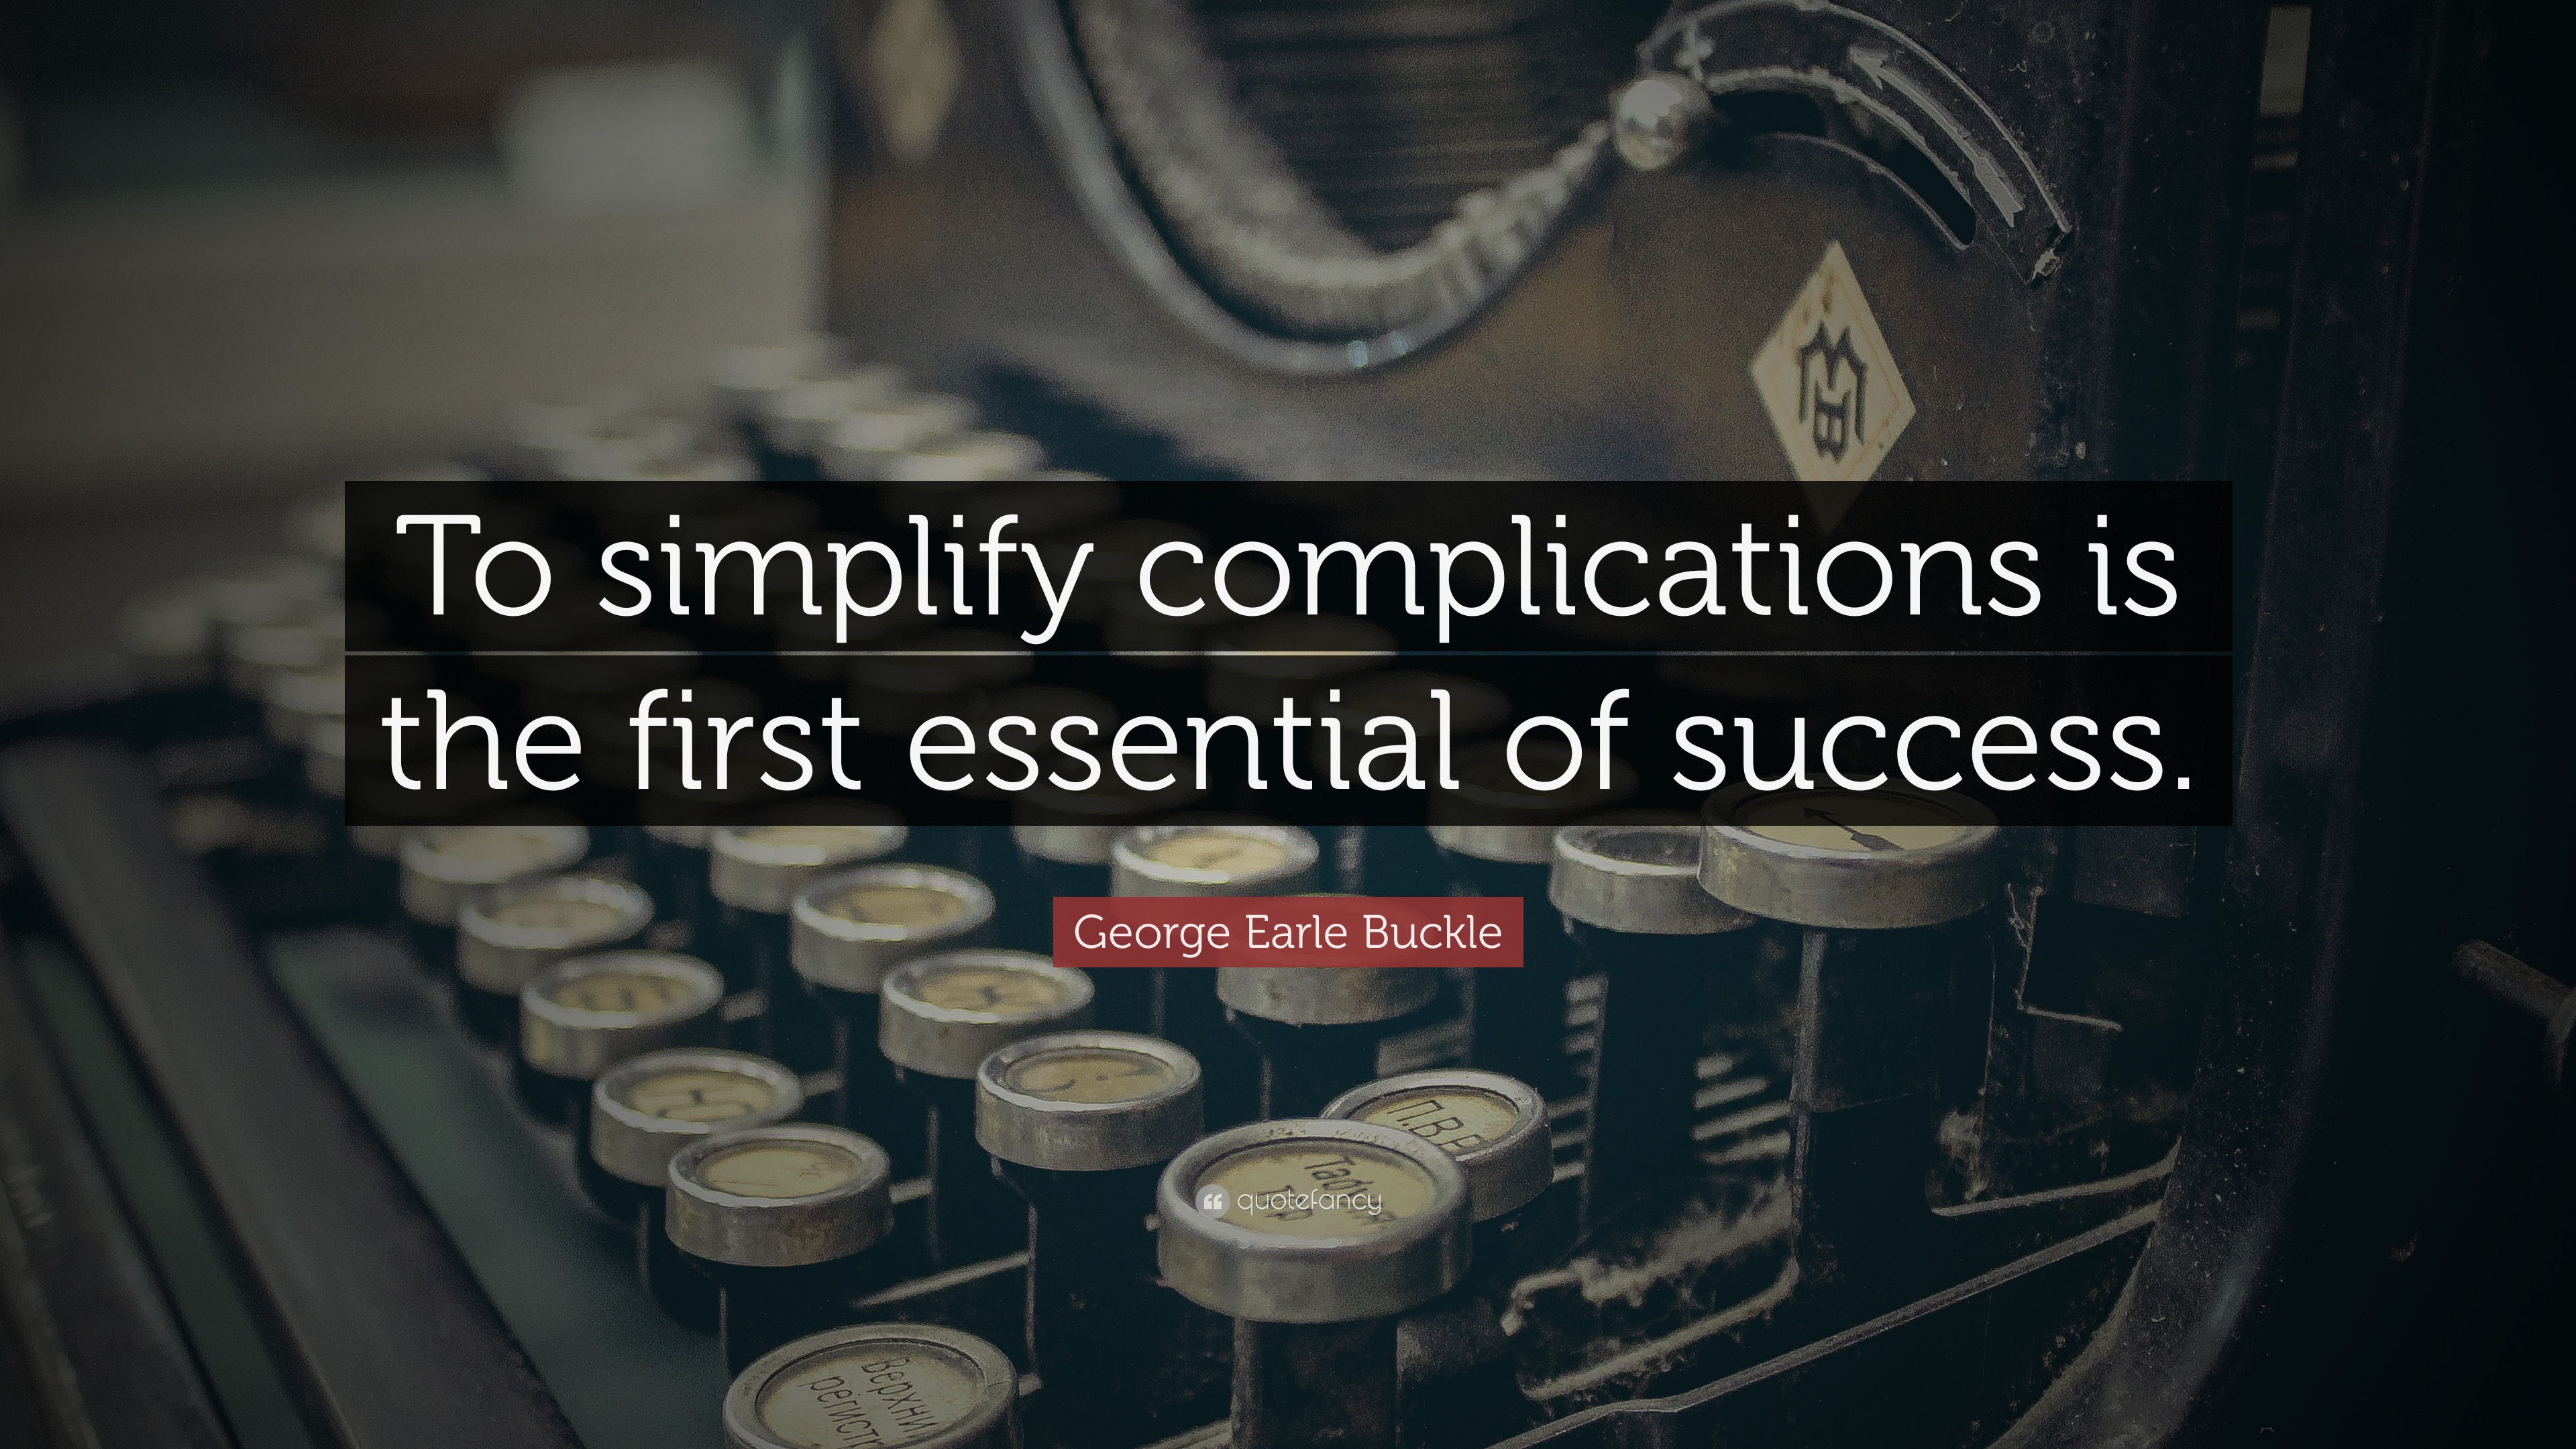 George Earle Buckle Quote: “To simplify